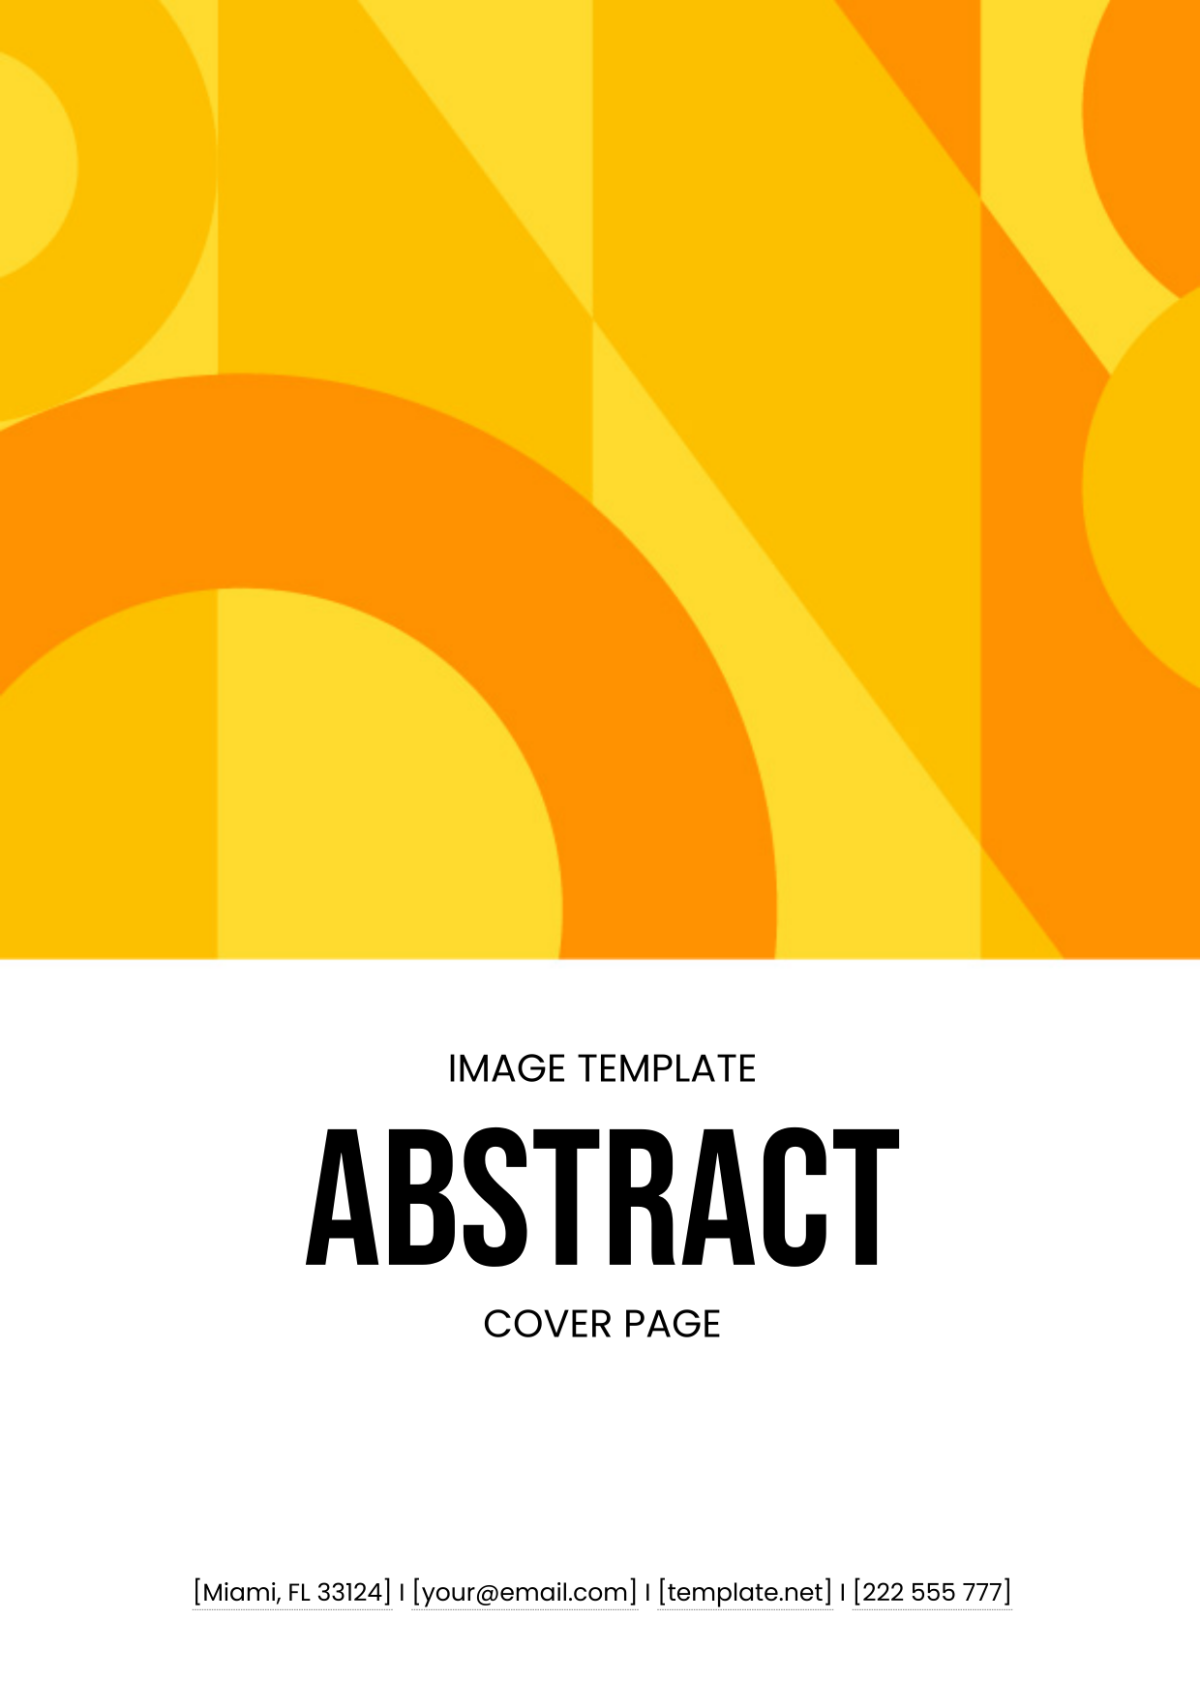 Free Abstract Cover Page Image Template